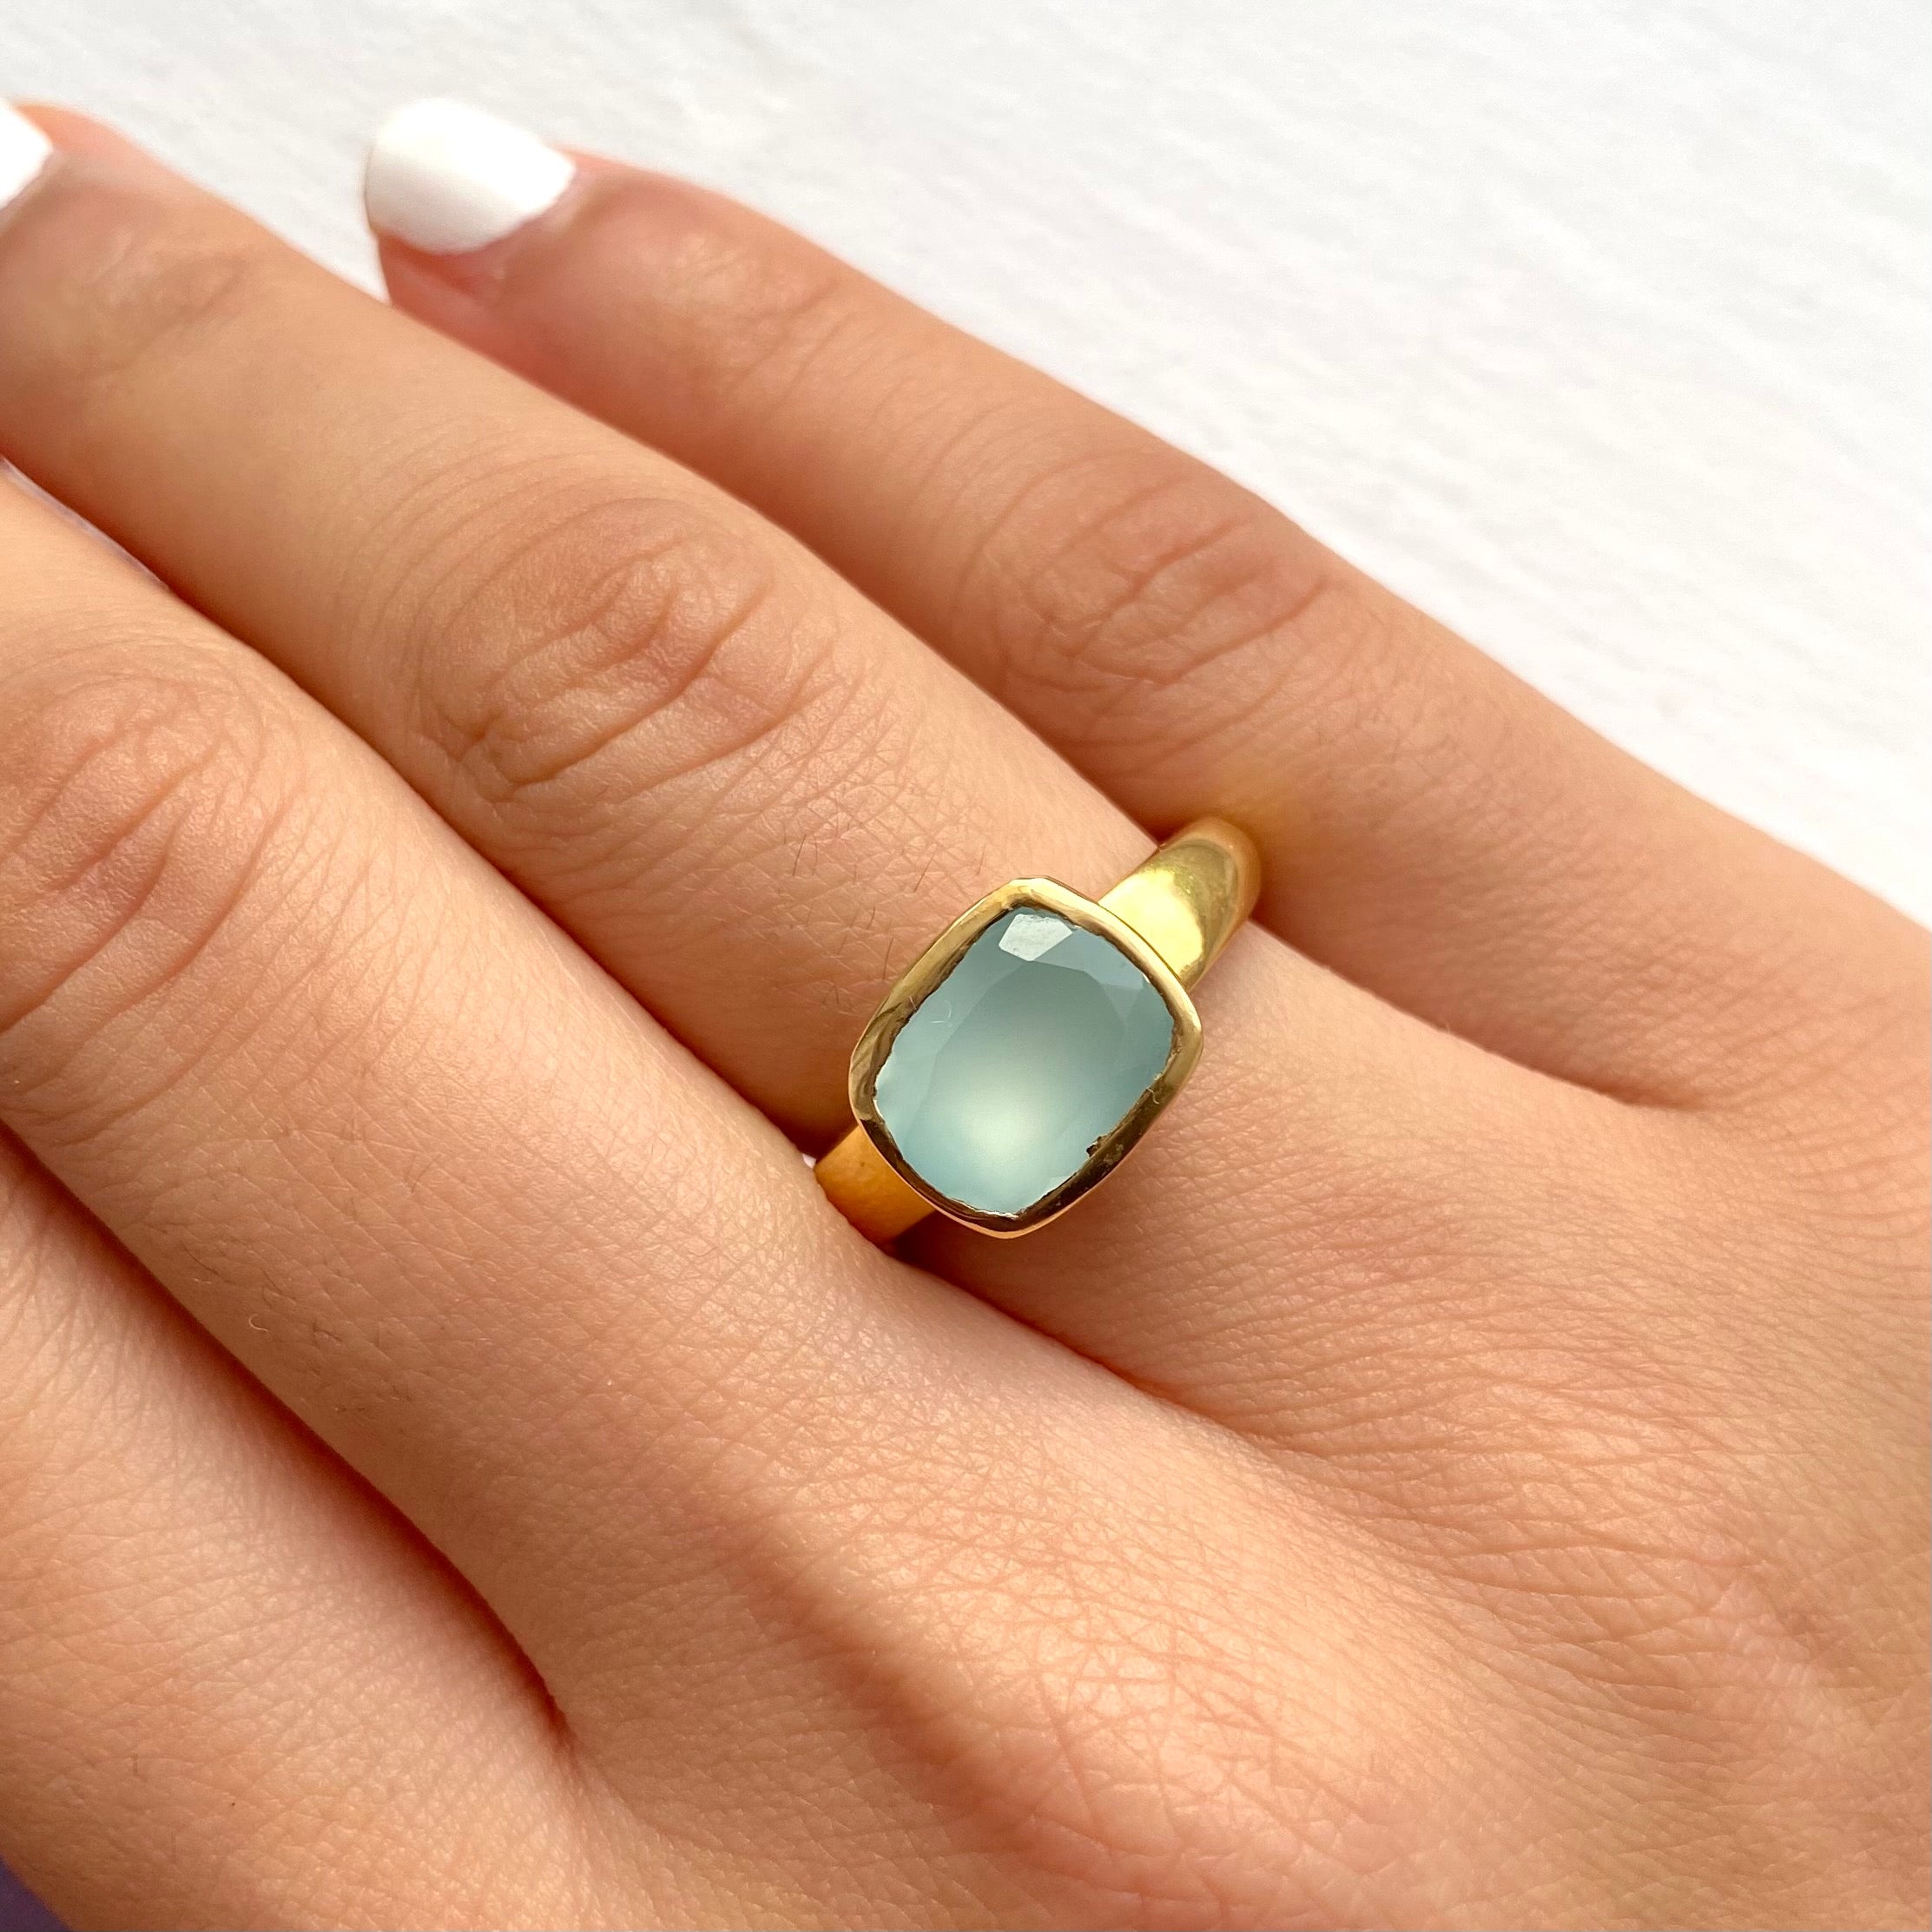 Faceted Rectangular Cut Natural Gemstone Gold Plated Sterling Silver Ring - Aqua Chalcedony